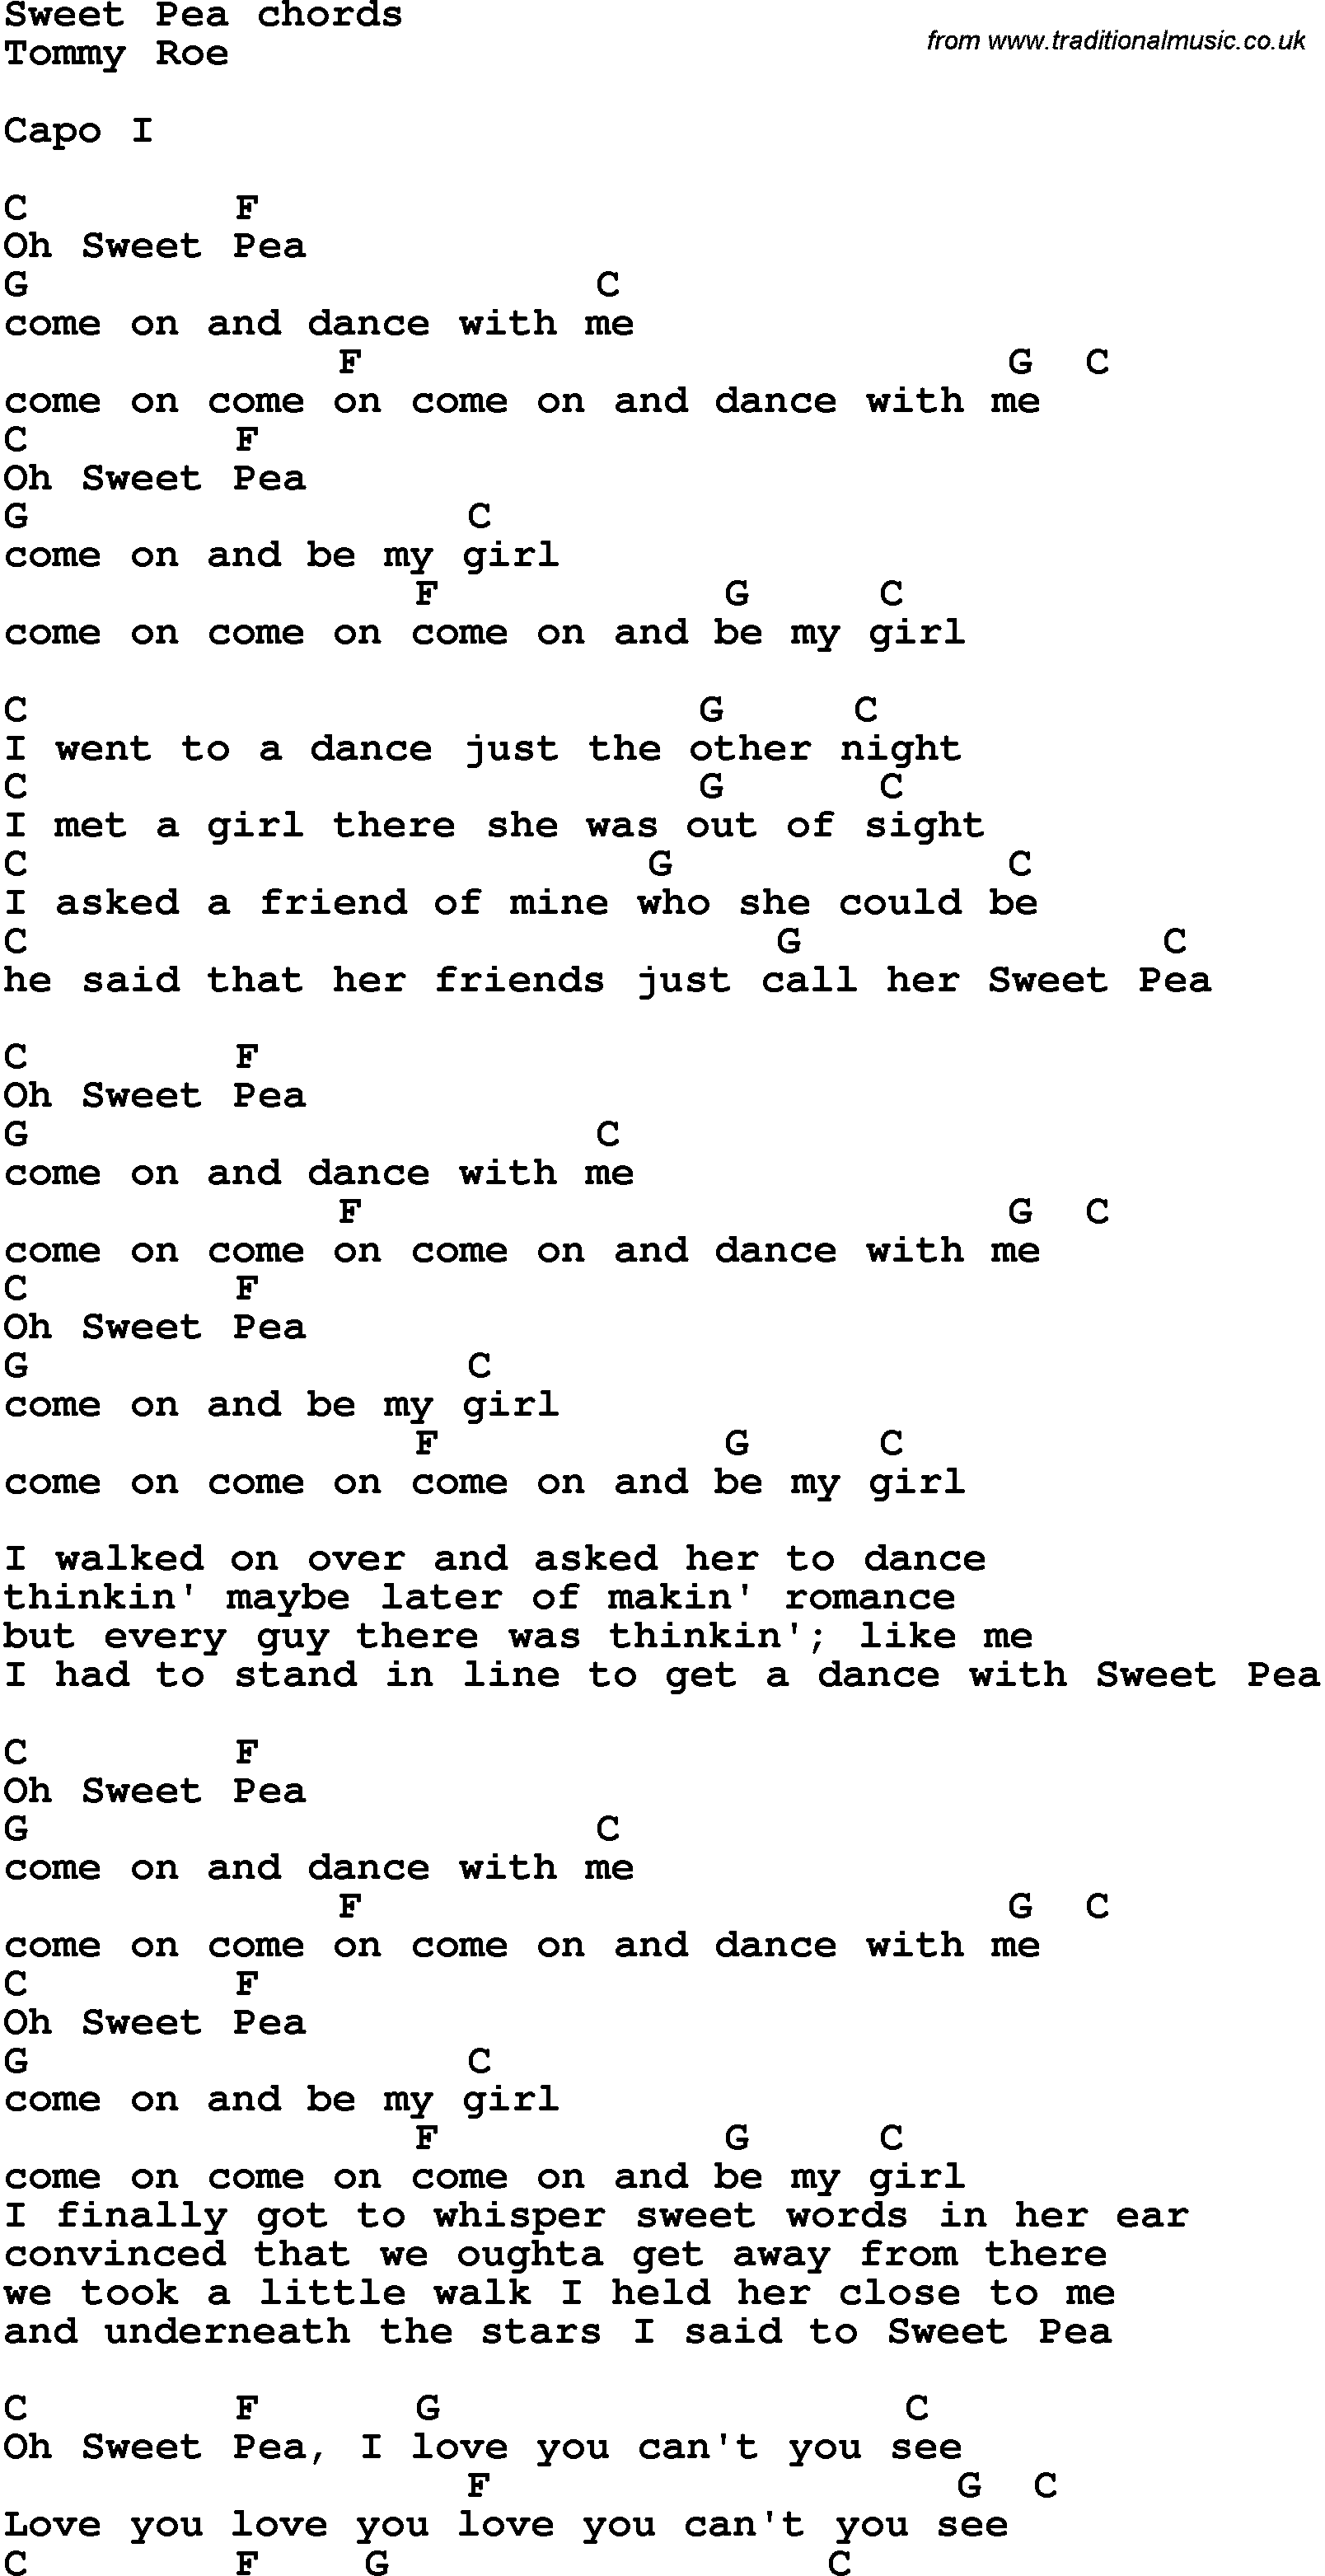 Song Lyrics with guitar chords for Sweet Pea